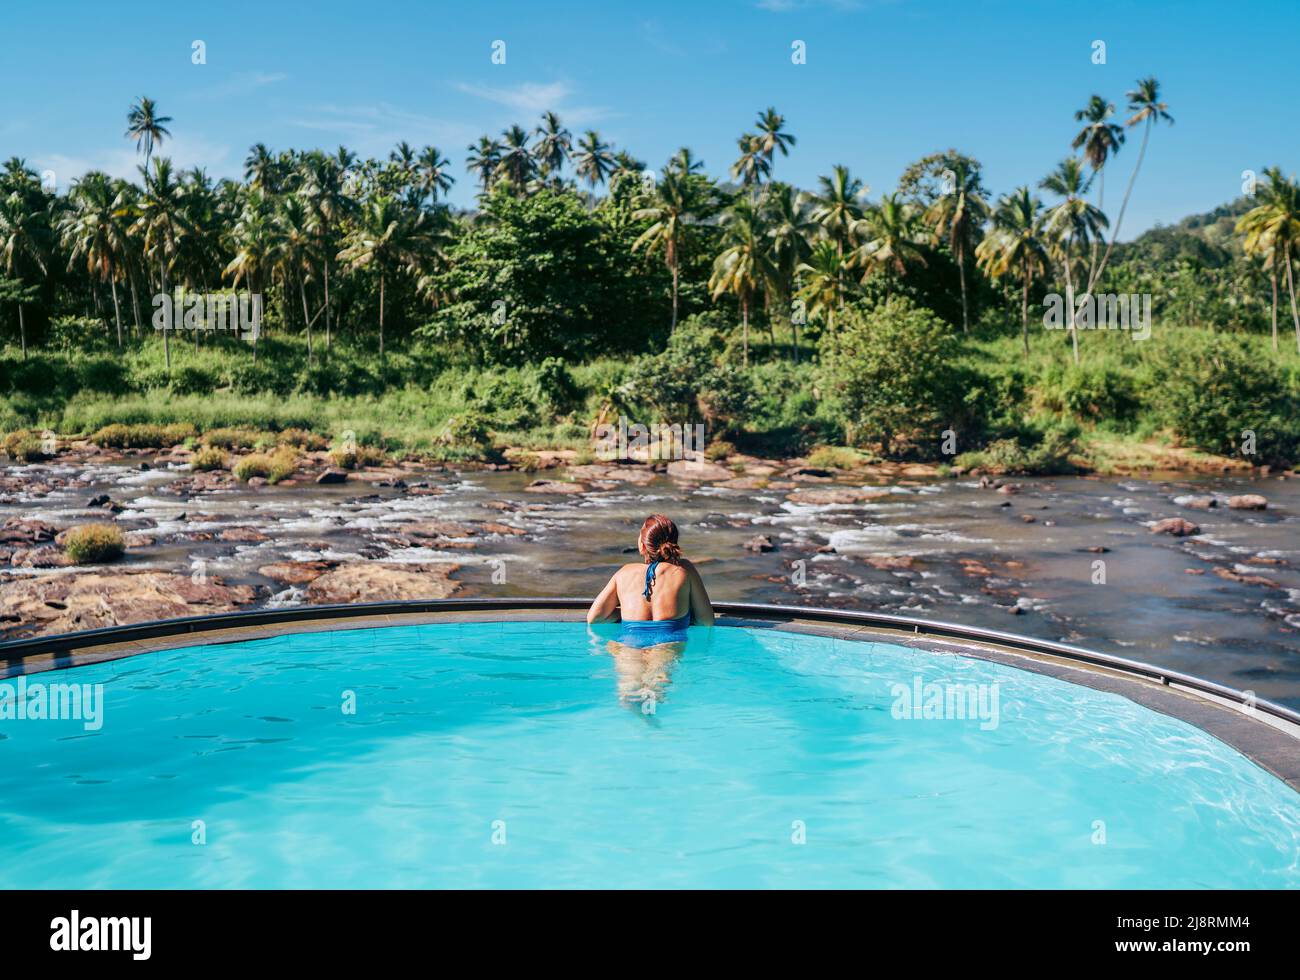 Woman in swimsuit relaxing in infinity swimming pool and watching wide rocky river landscape with jungle banks in Pinnawala Elephant Orphanage. Stock Photo